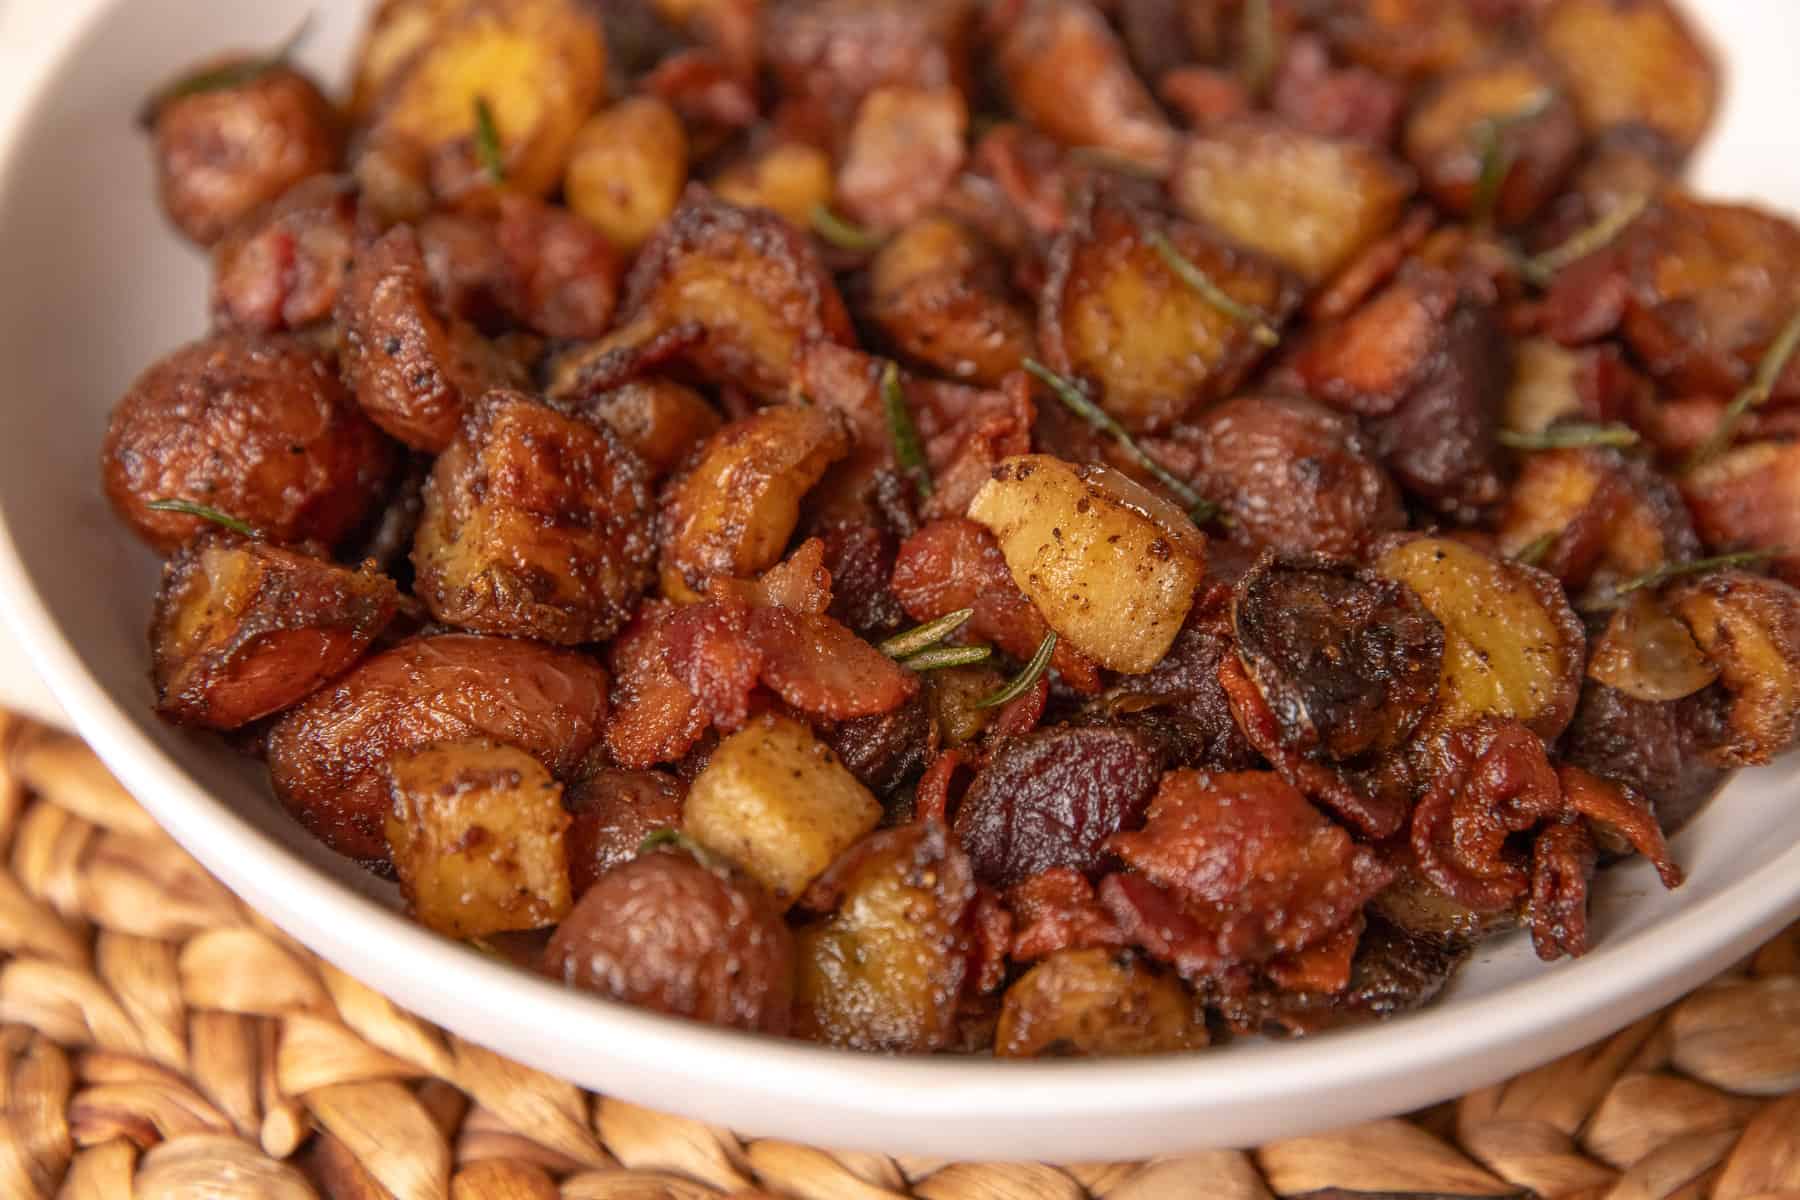 Roasted Rosemary Potatoes with Apples & Bacon